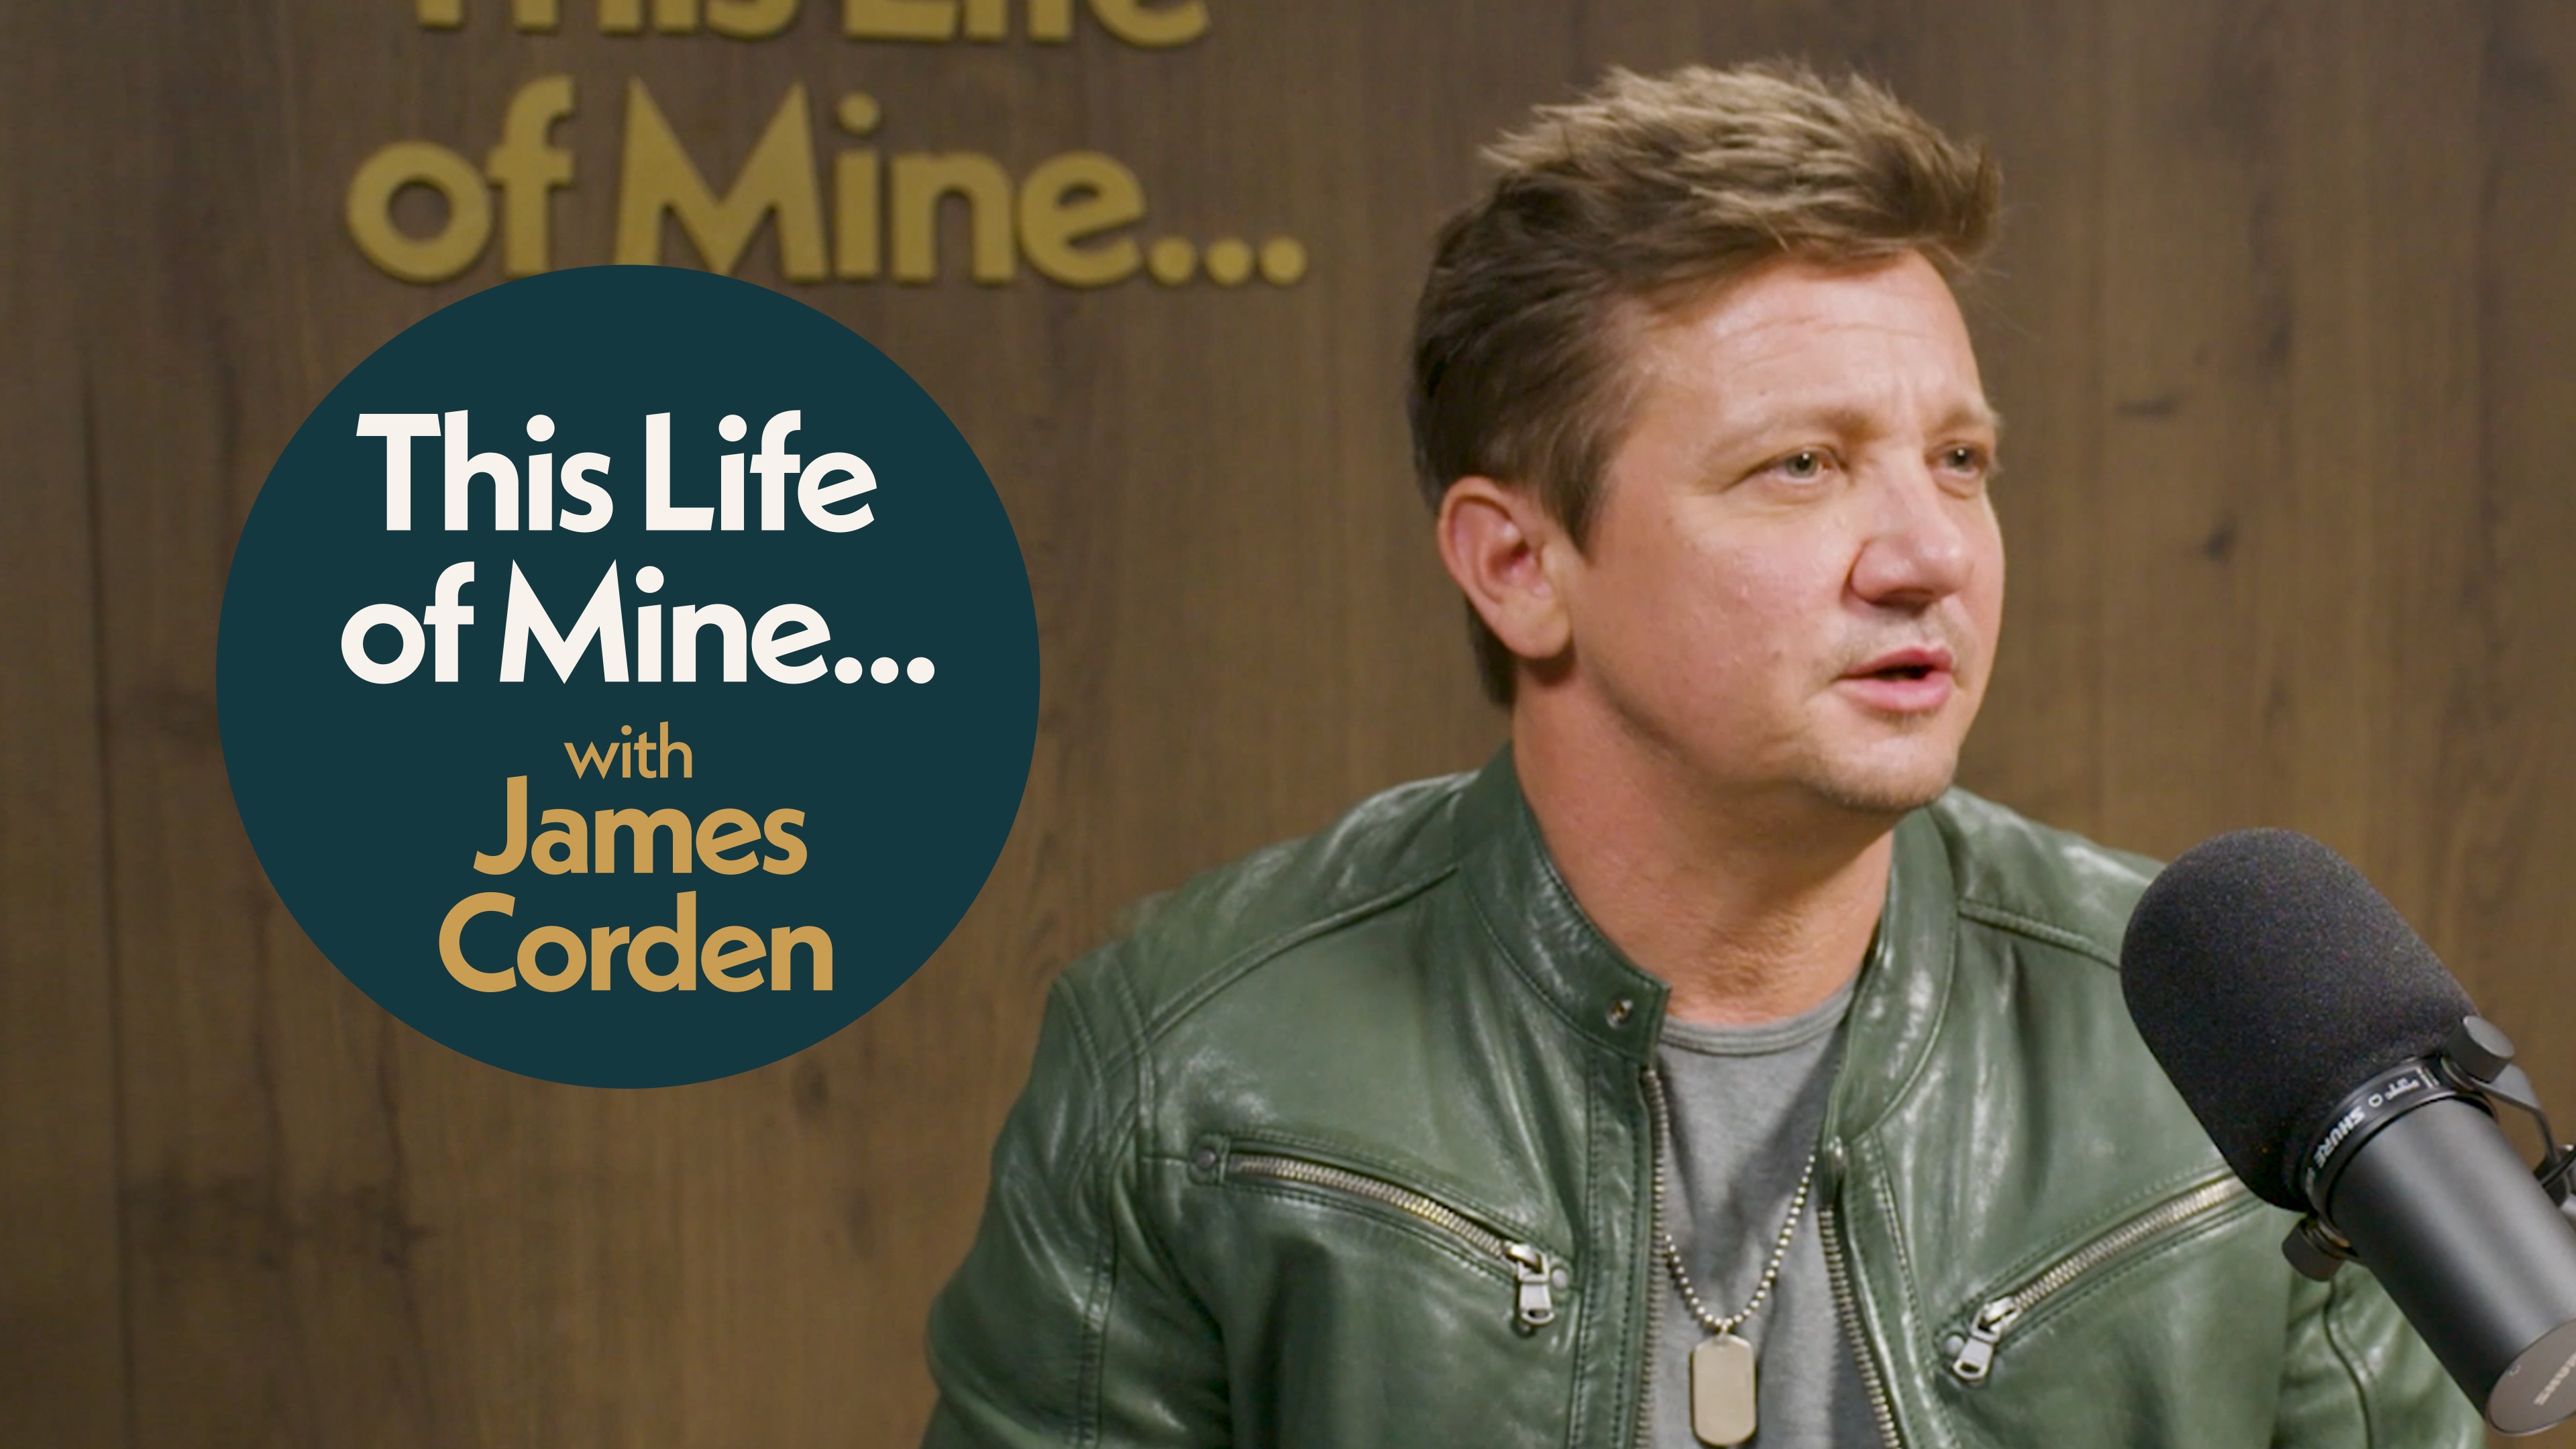 Jeremy Renner on "This Life of Mine with James Corden"